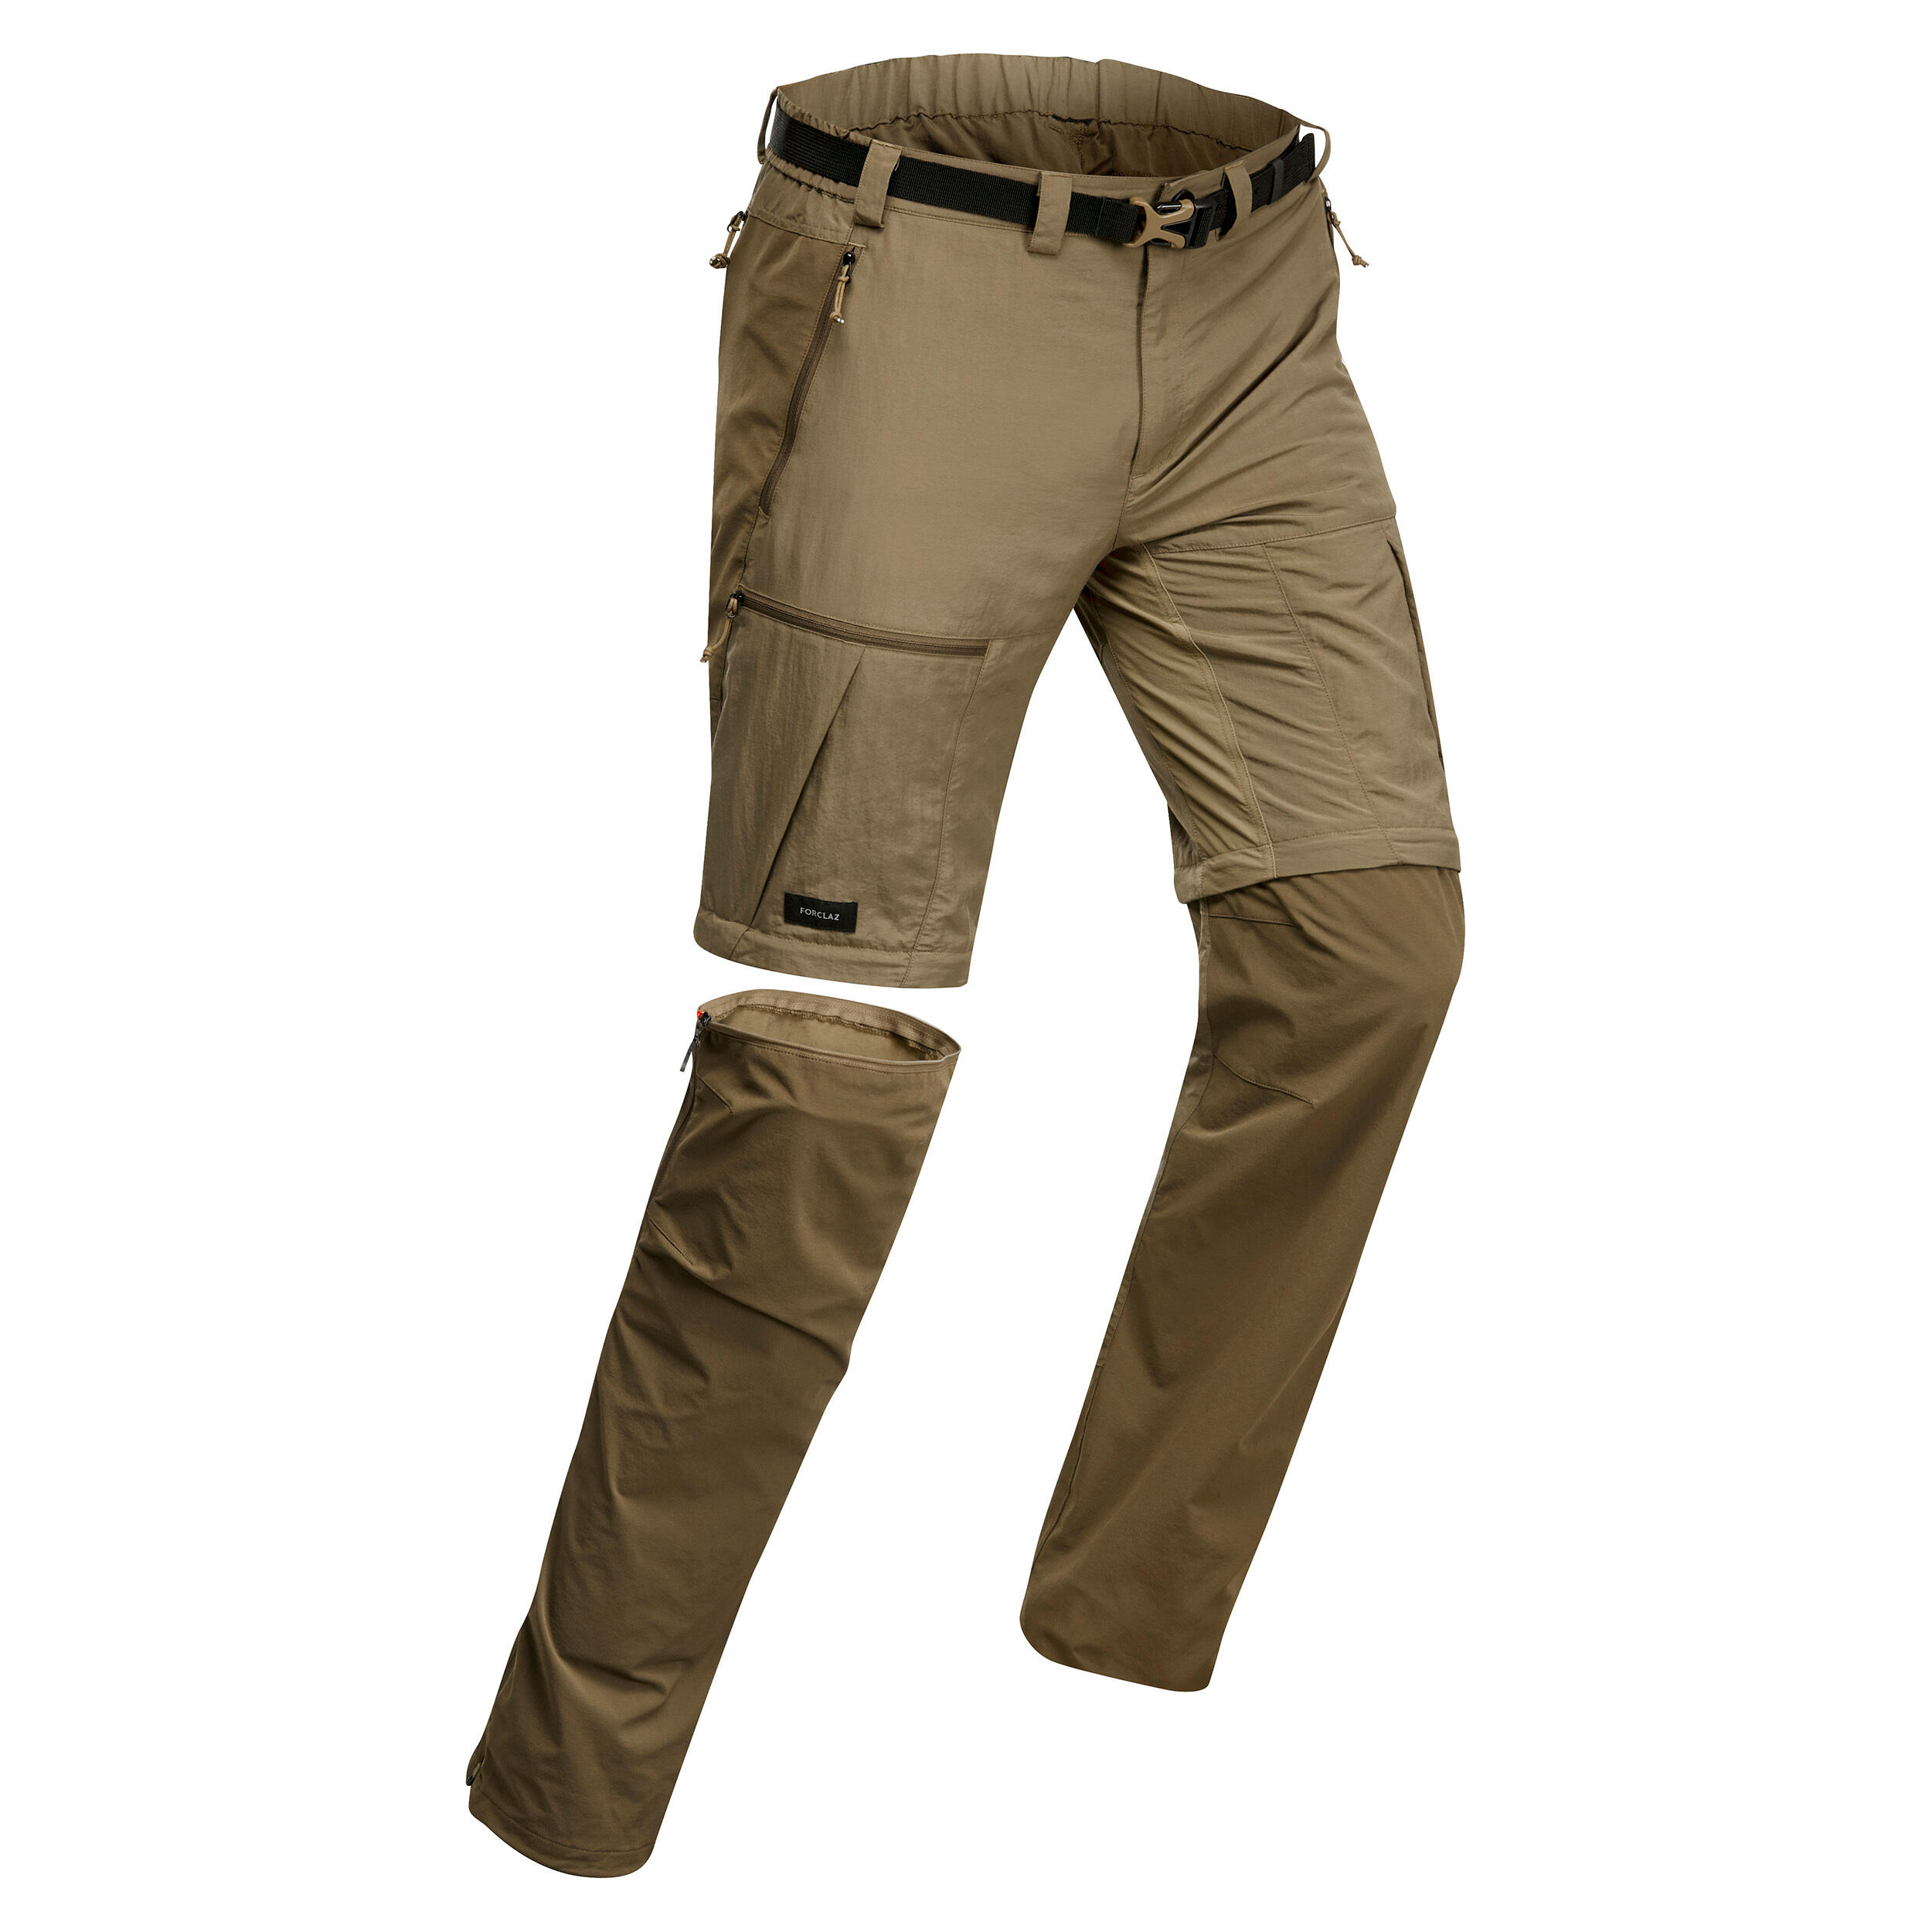 Daily Wear Convertible Hiking Pants Mens Quick Dry Zip Off Fishing Cargo  Work Pants Waterproof Trousers for Outdoor/Everyday (Color : Army Green,  Size : M-Medium) at Amazon Men's Clothing store